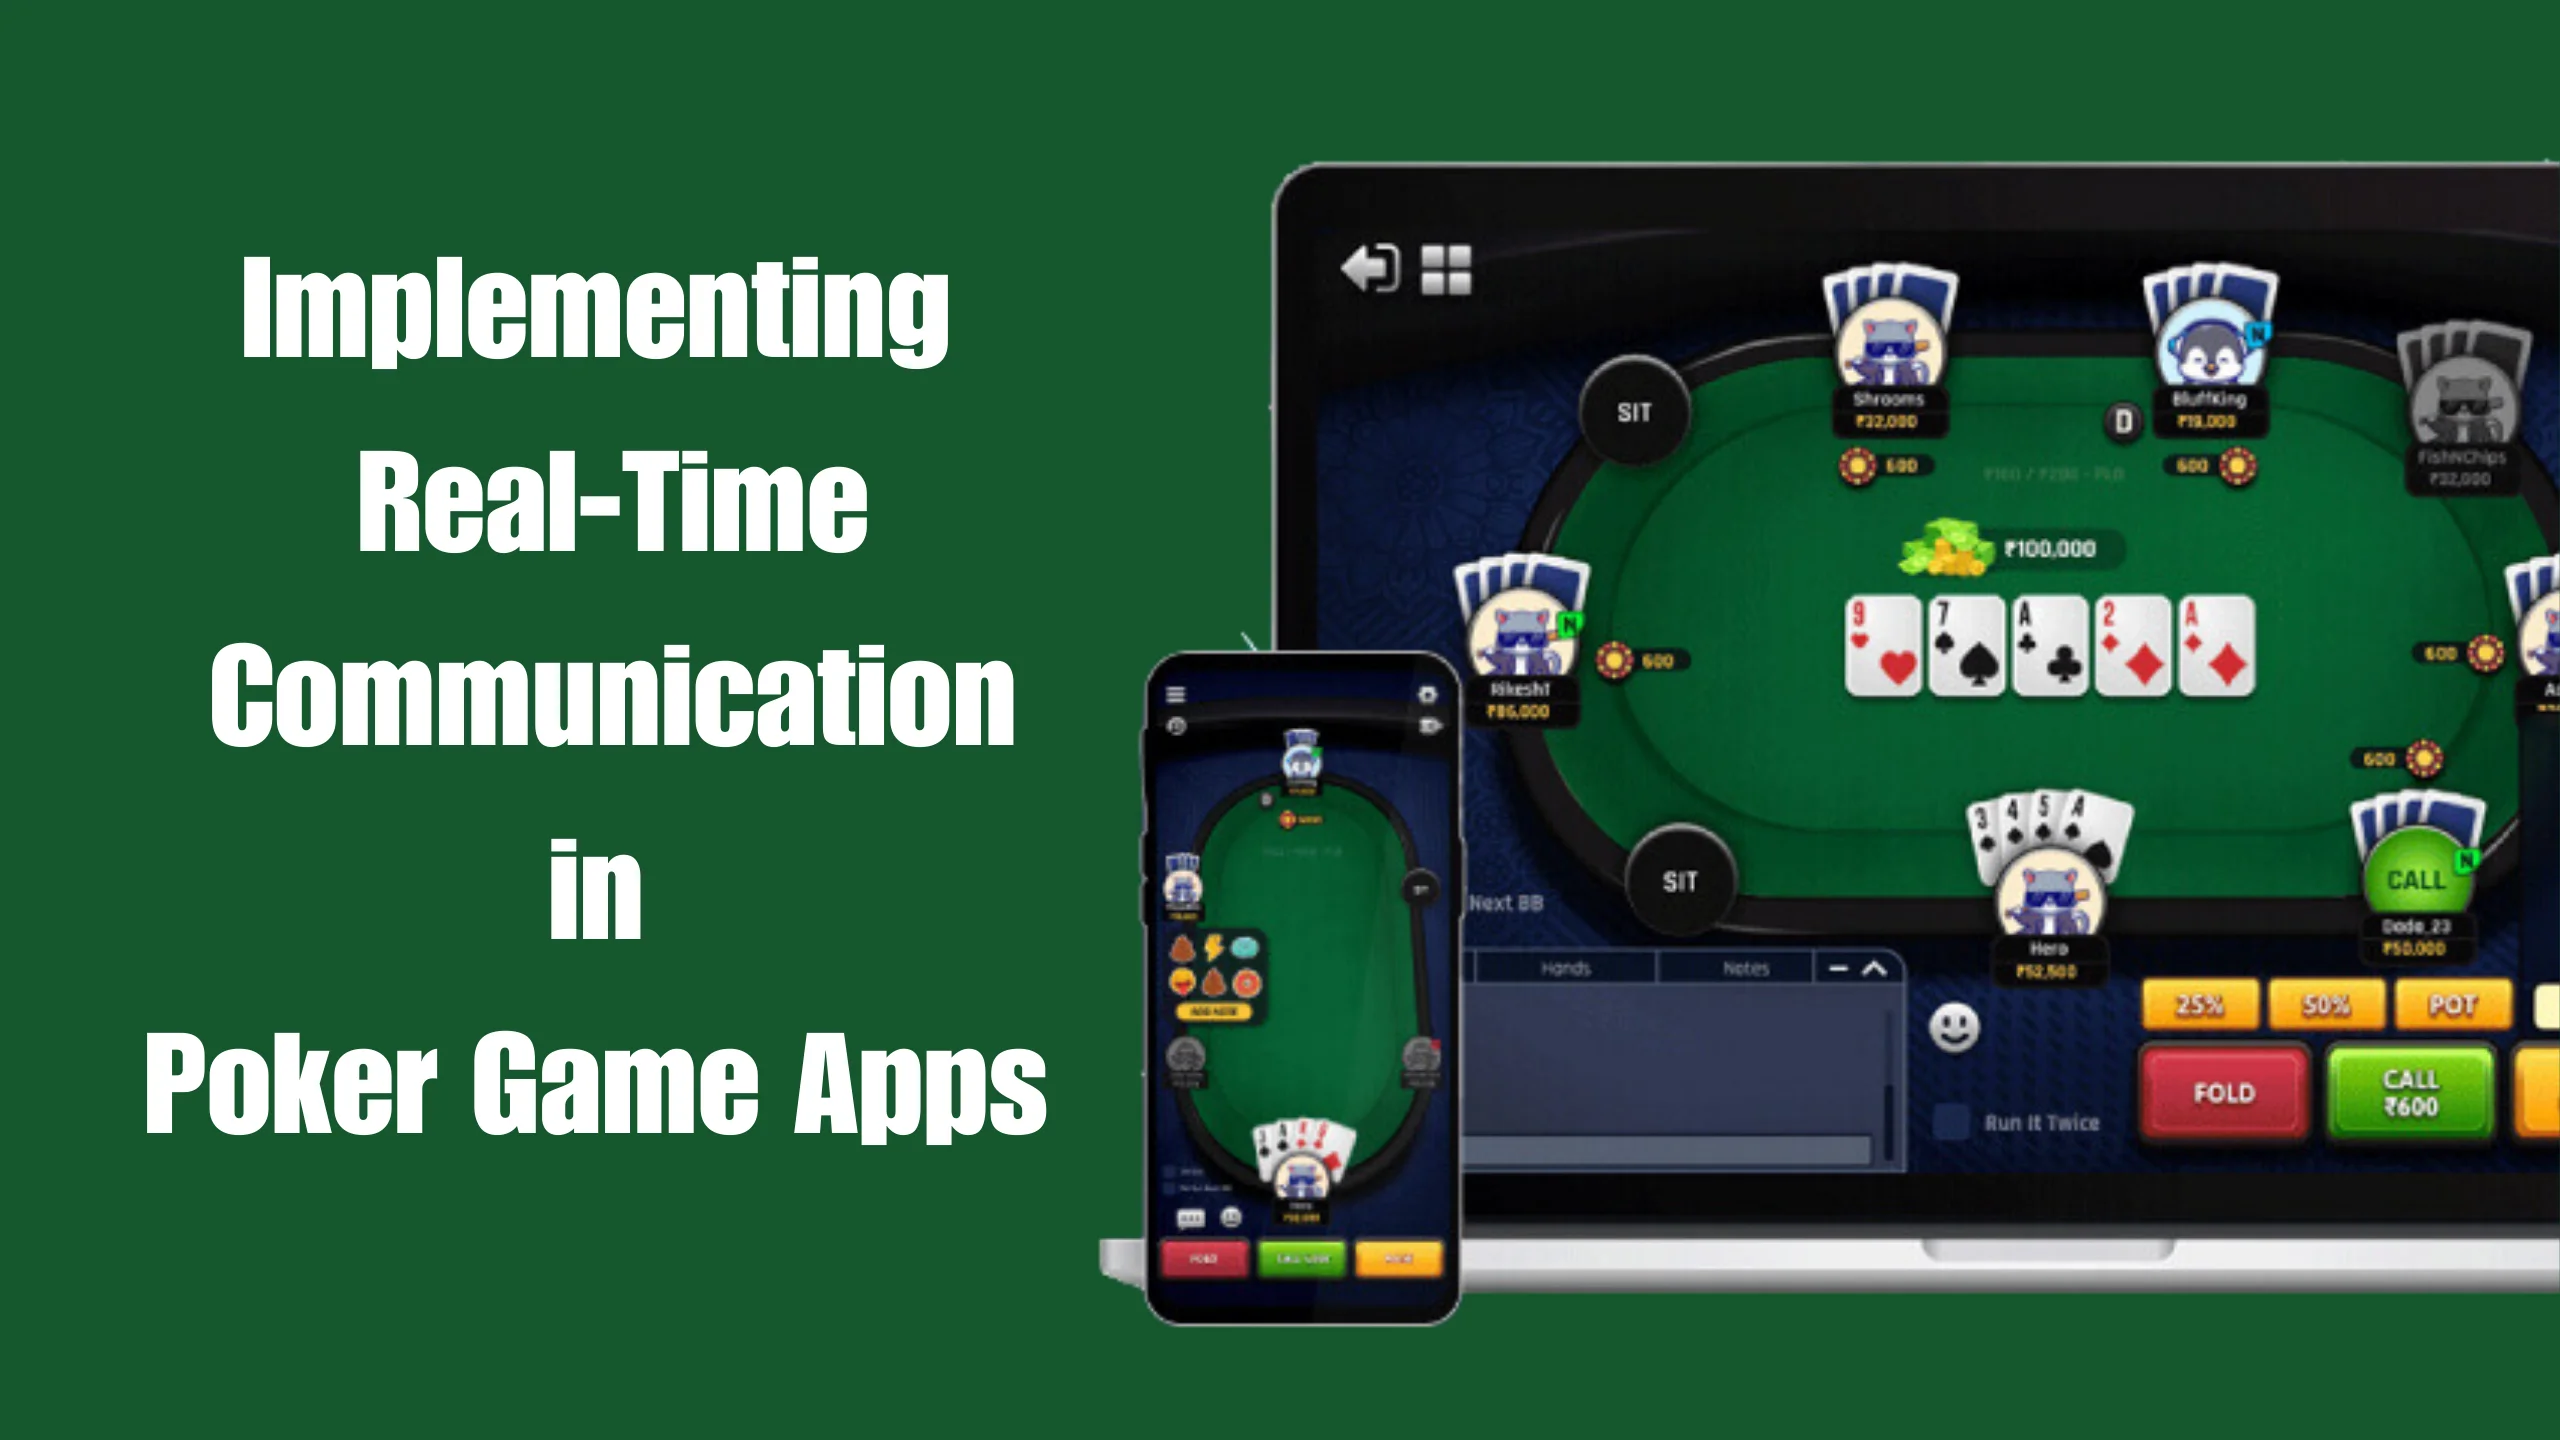 Implement real-time communication to elevate player engagement in poker game apps. Enhance gaming interactions with seamless, live updates and interactions.